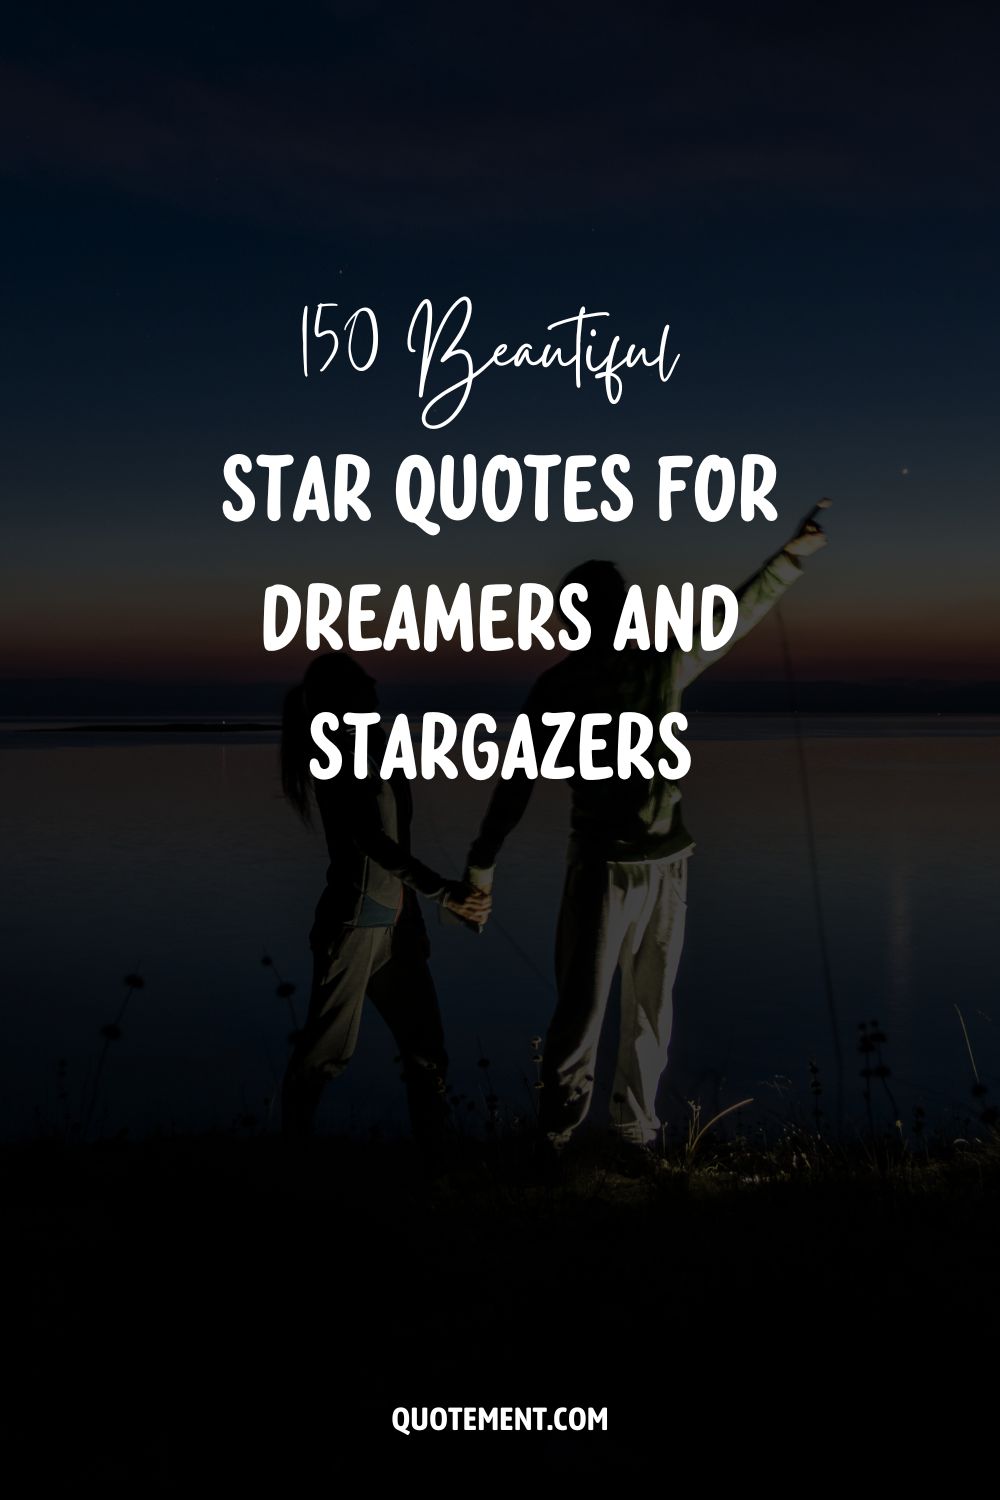 150 Beautiful Star Quotes For Dreamers And Stargazers